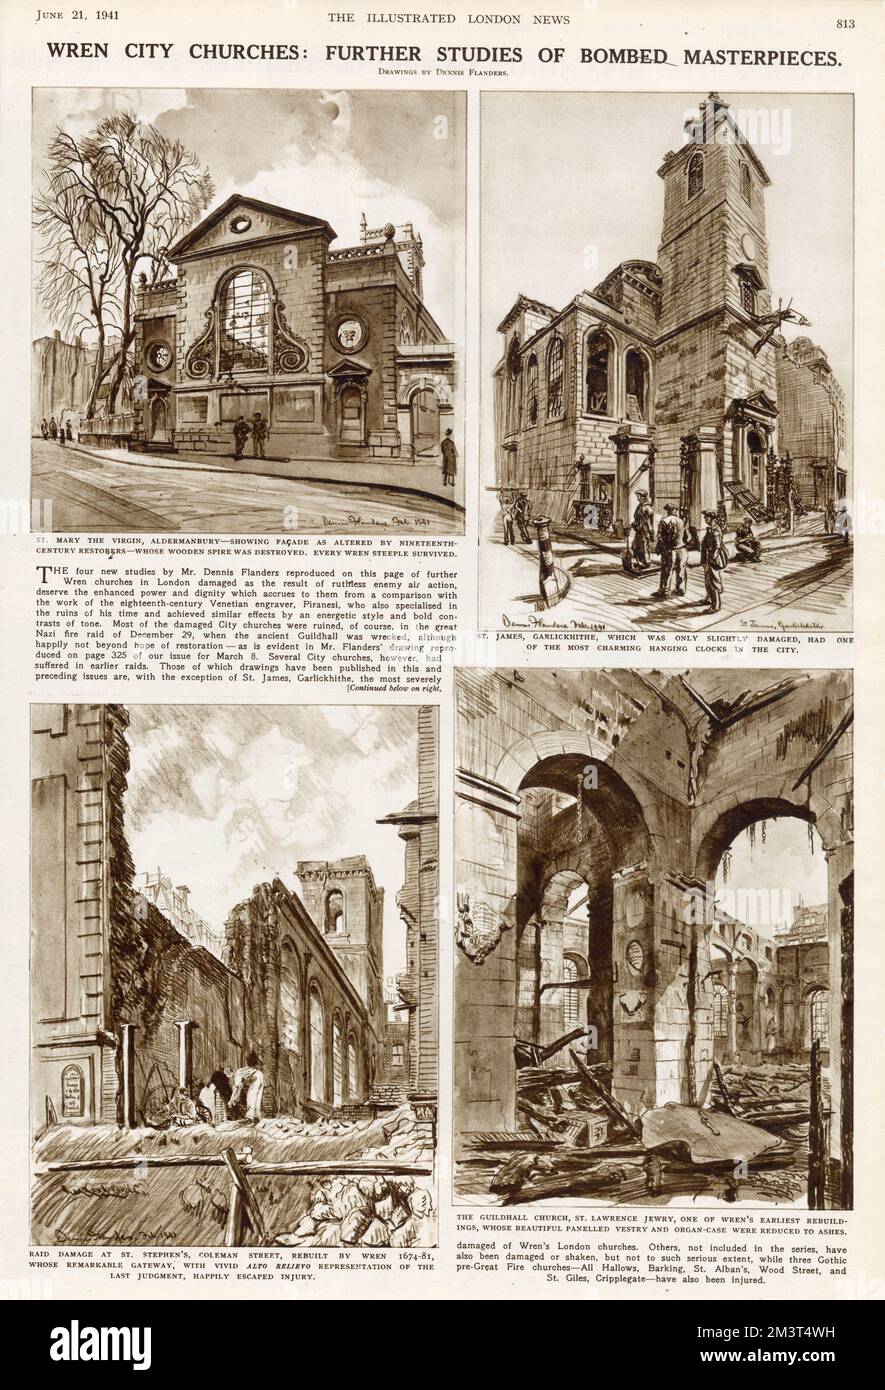 Studies of churches in the City of London designed by Sir Christopher Wren damaged by bombing in World War Two. Clockwise from top left: St Mary the Virgin, Aldermanbury - showing facade as altered by 19th century restorers - whose wooden spire was destroyed; St James, Garlickhithe, only slightly damaged, which had one of the most charming hanging clocks in the City; Guildhall Church, St Lawrence Jewry, whose panelled vestry and organ-case were reduced to ashes; St Stephen's, Coleman Street, rebuilt by Wren 1674-81. Stock Photo